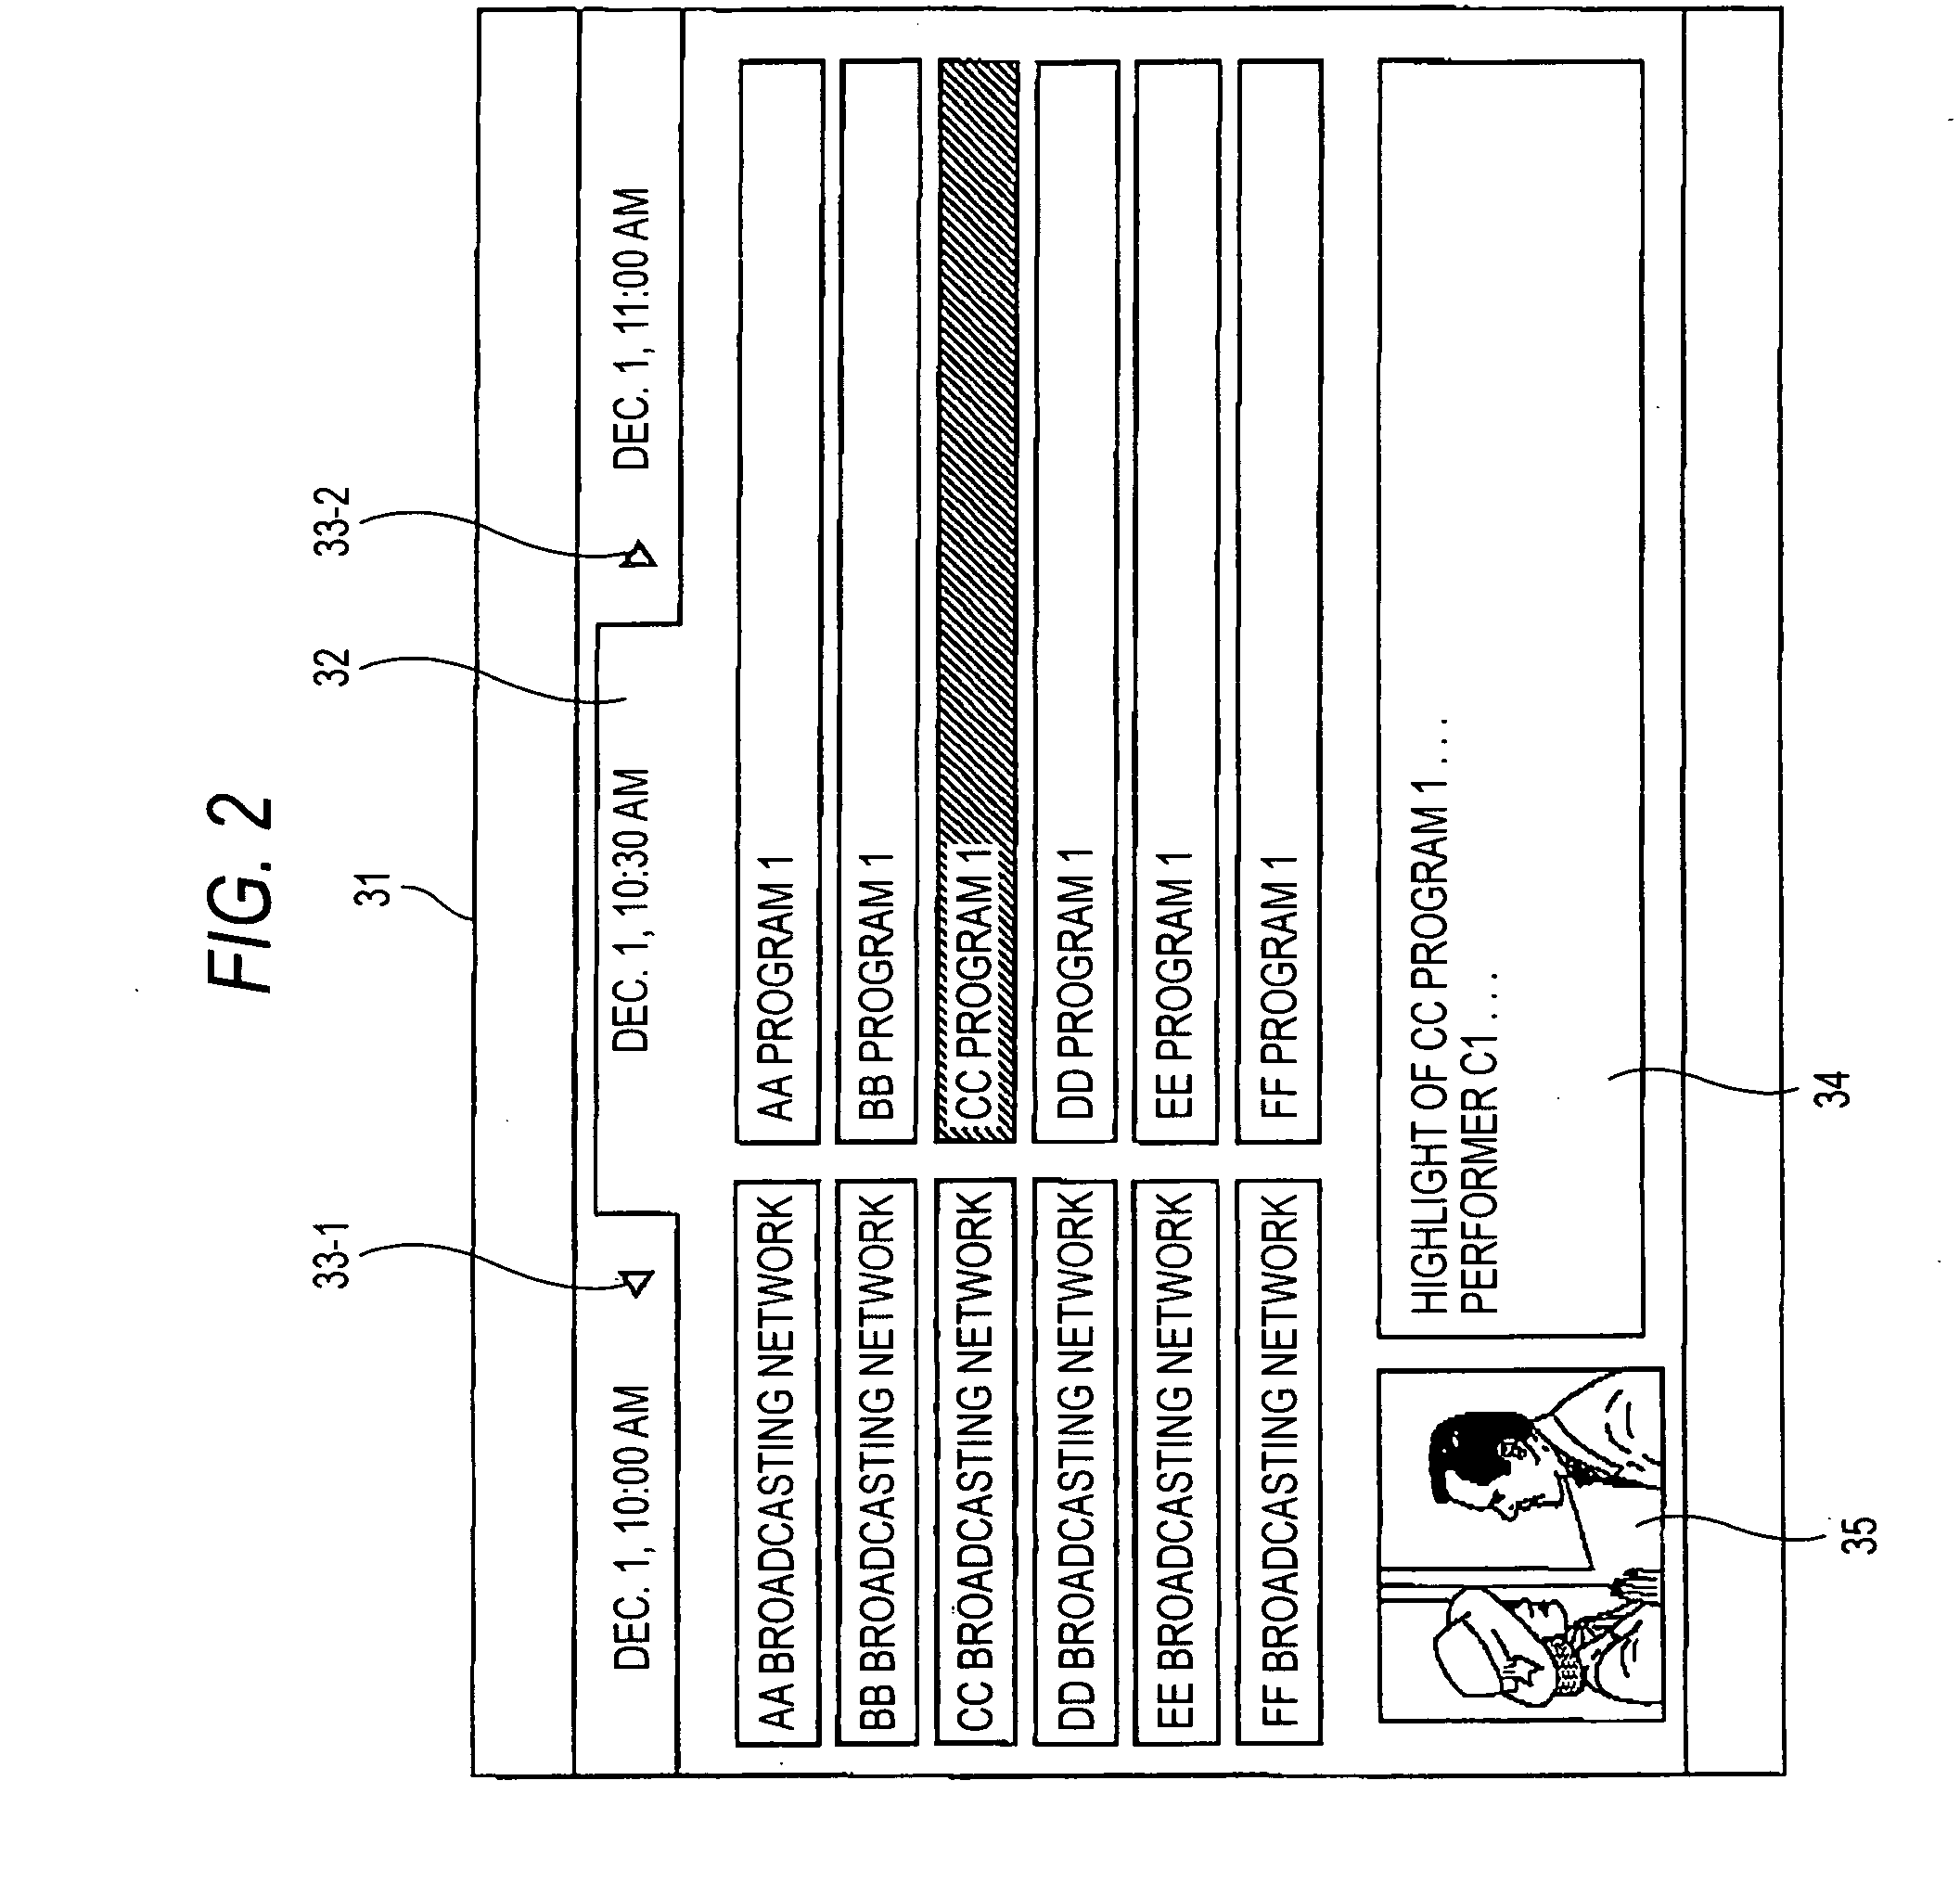 Display control apparatus, method thereof and program product thereof